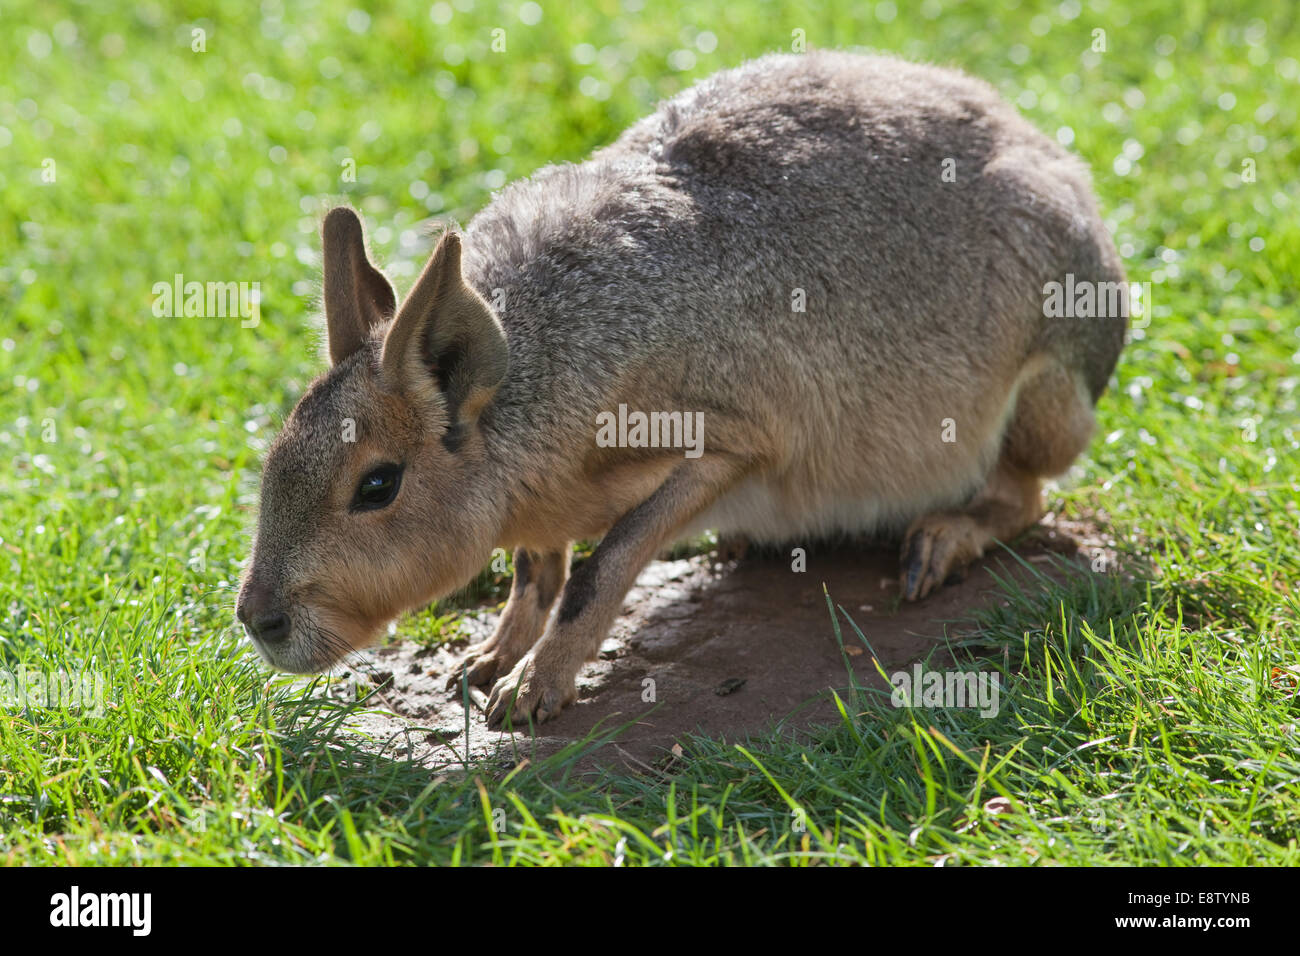 Mara, or Patagonian Hare (Dolichotis patagonum). Behavioural stance; 'mild submission' or 'invitation' to another. Squatting. Stock Photo